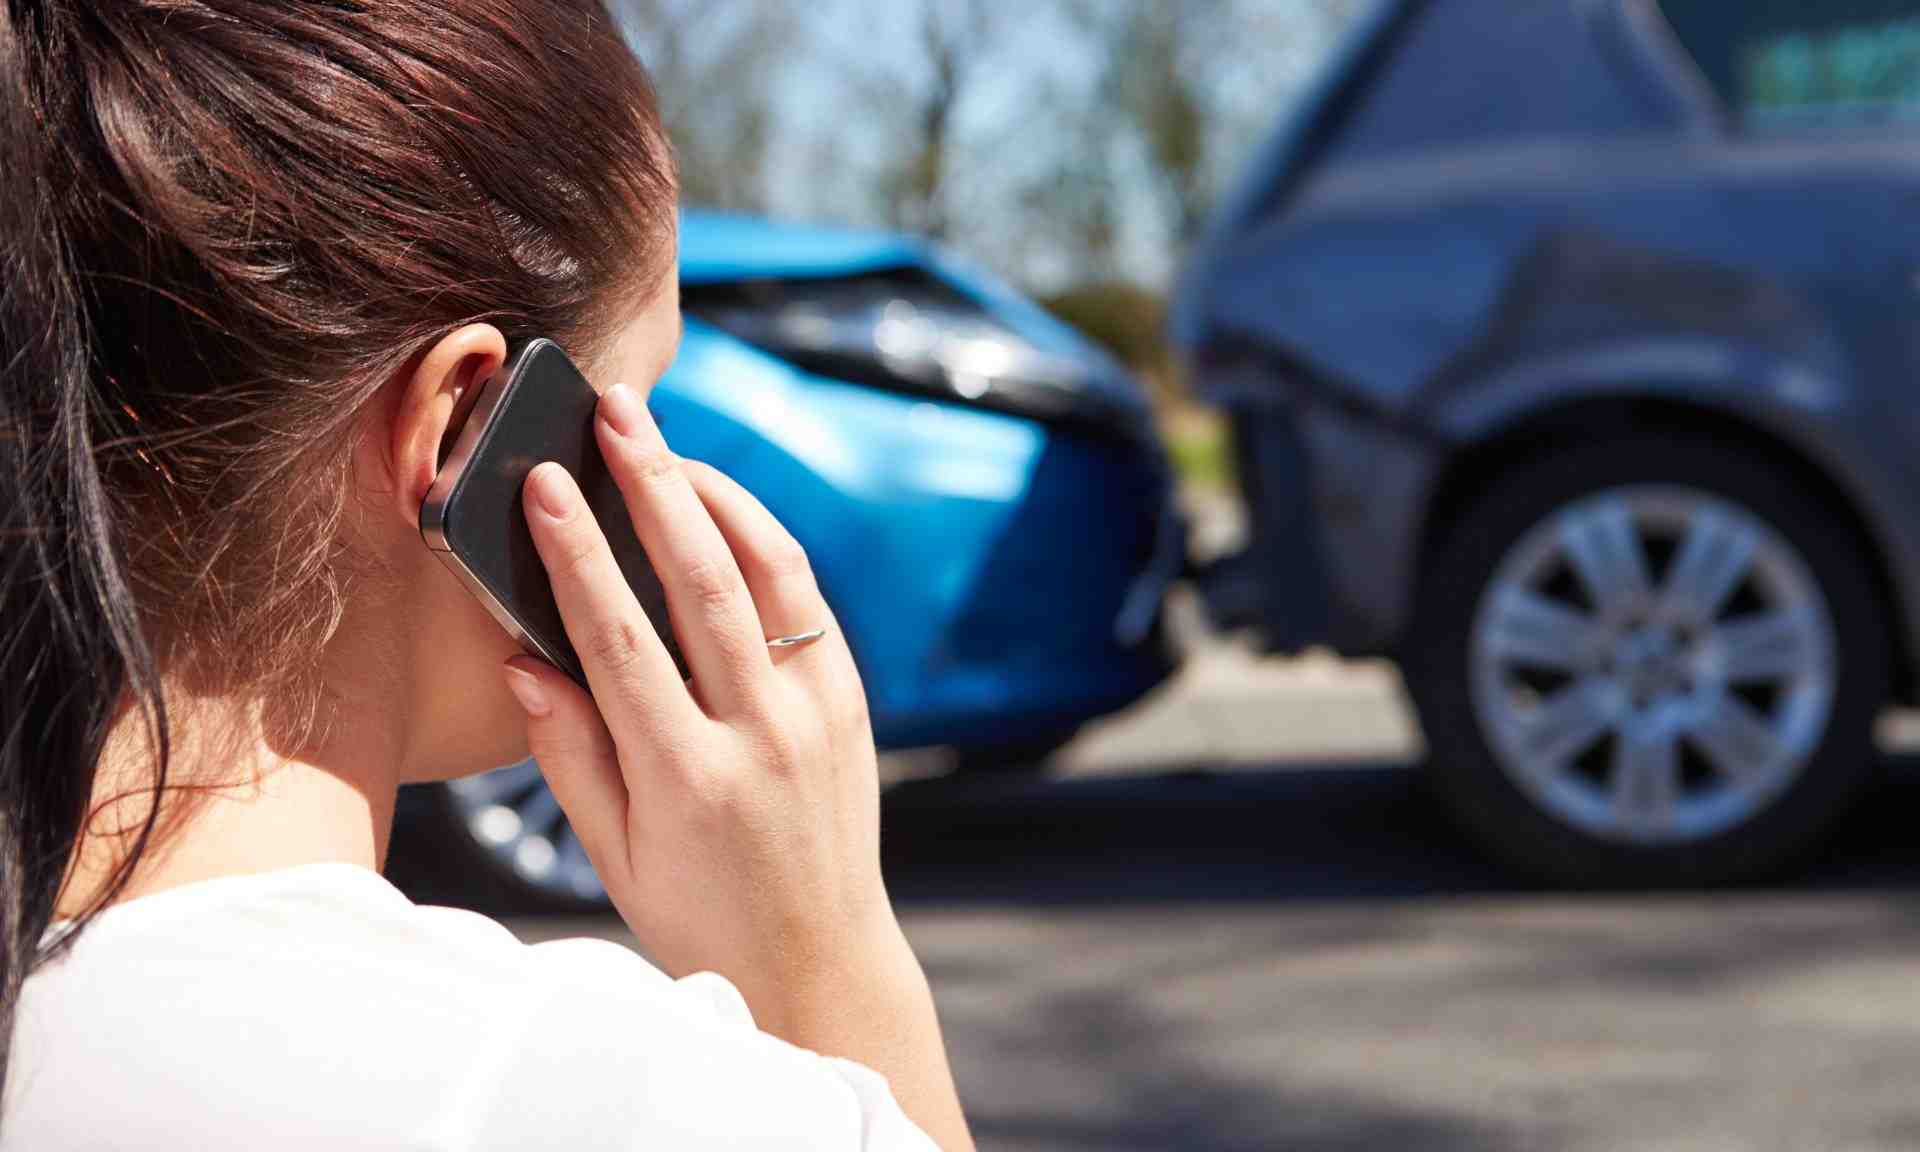 What is collision insurance and what is covered?